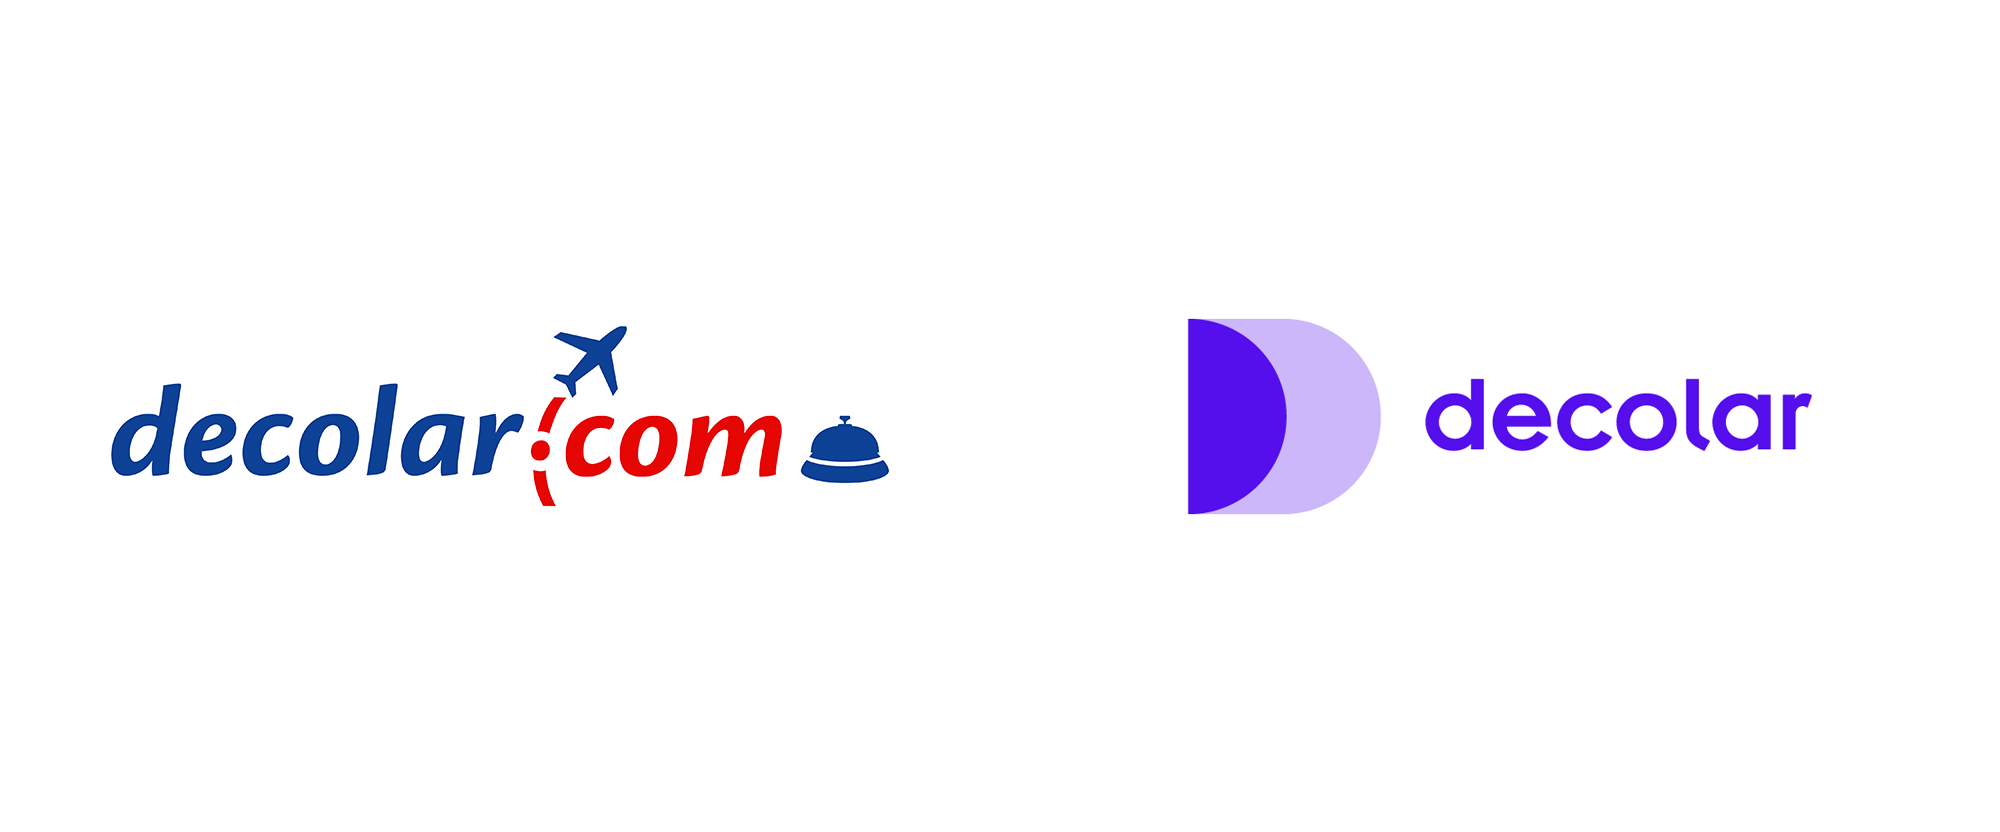 https://www.underconsideration.com/brandnew/archives/decolar_logo_before_after.png